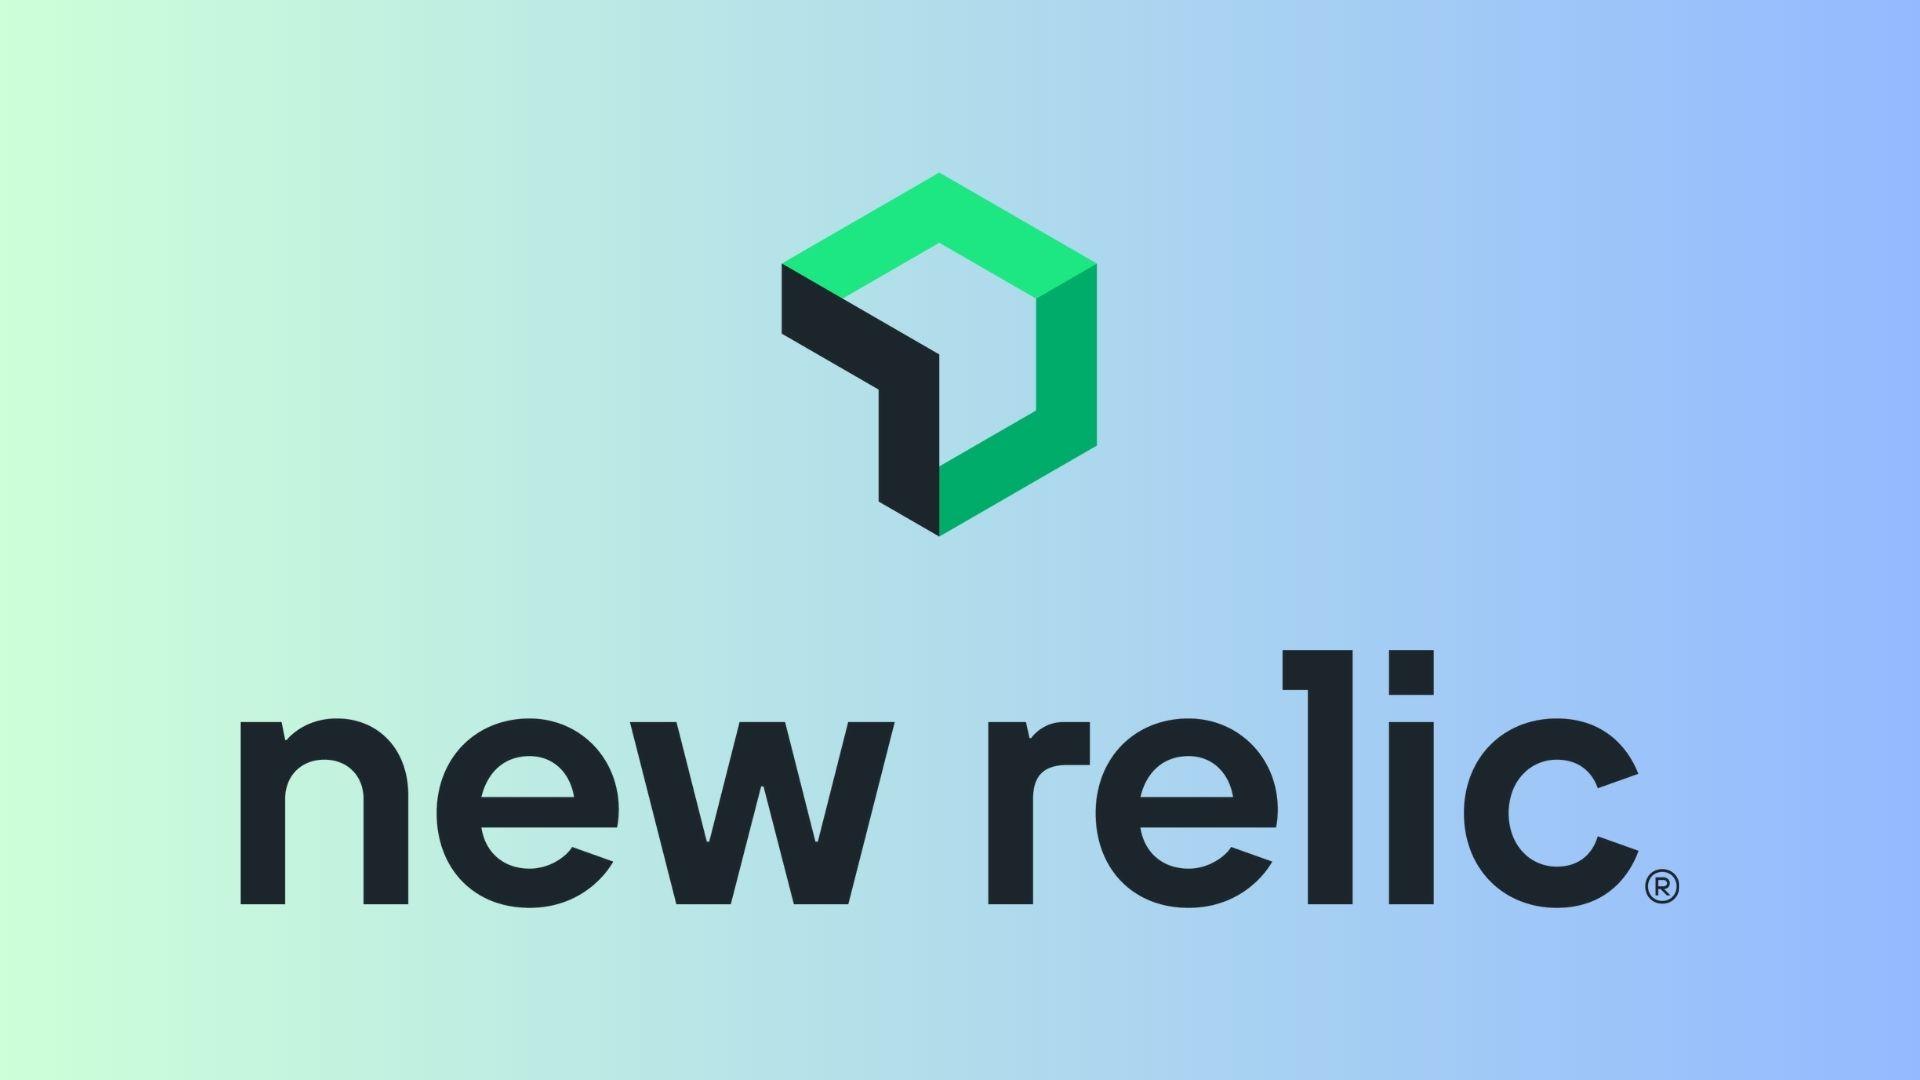 What is New Relic?